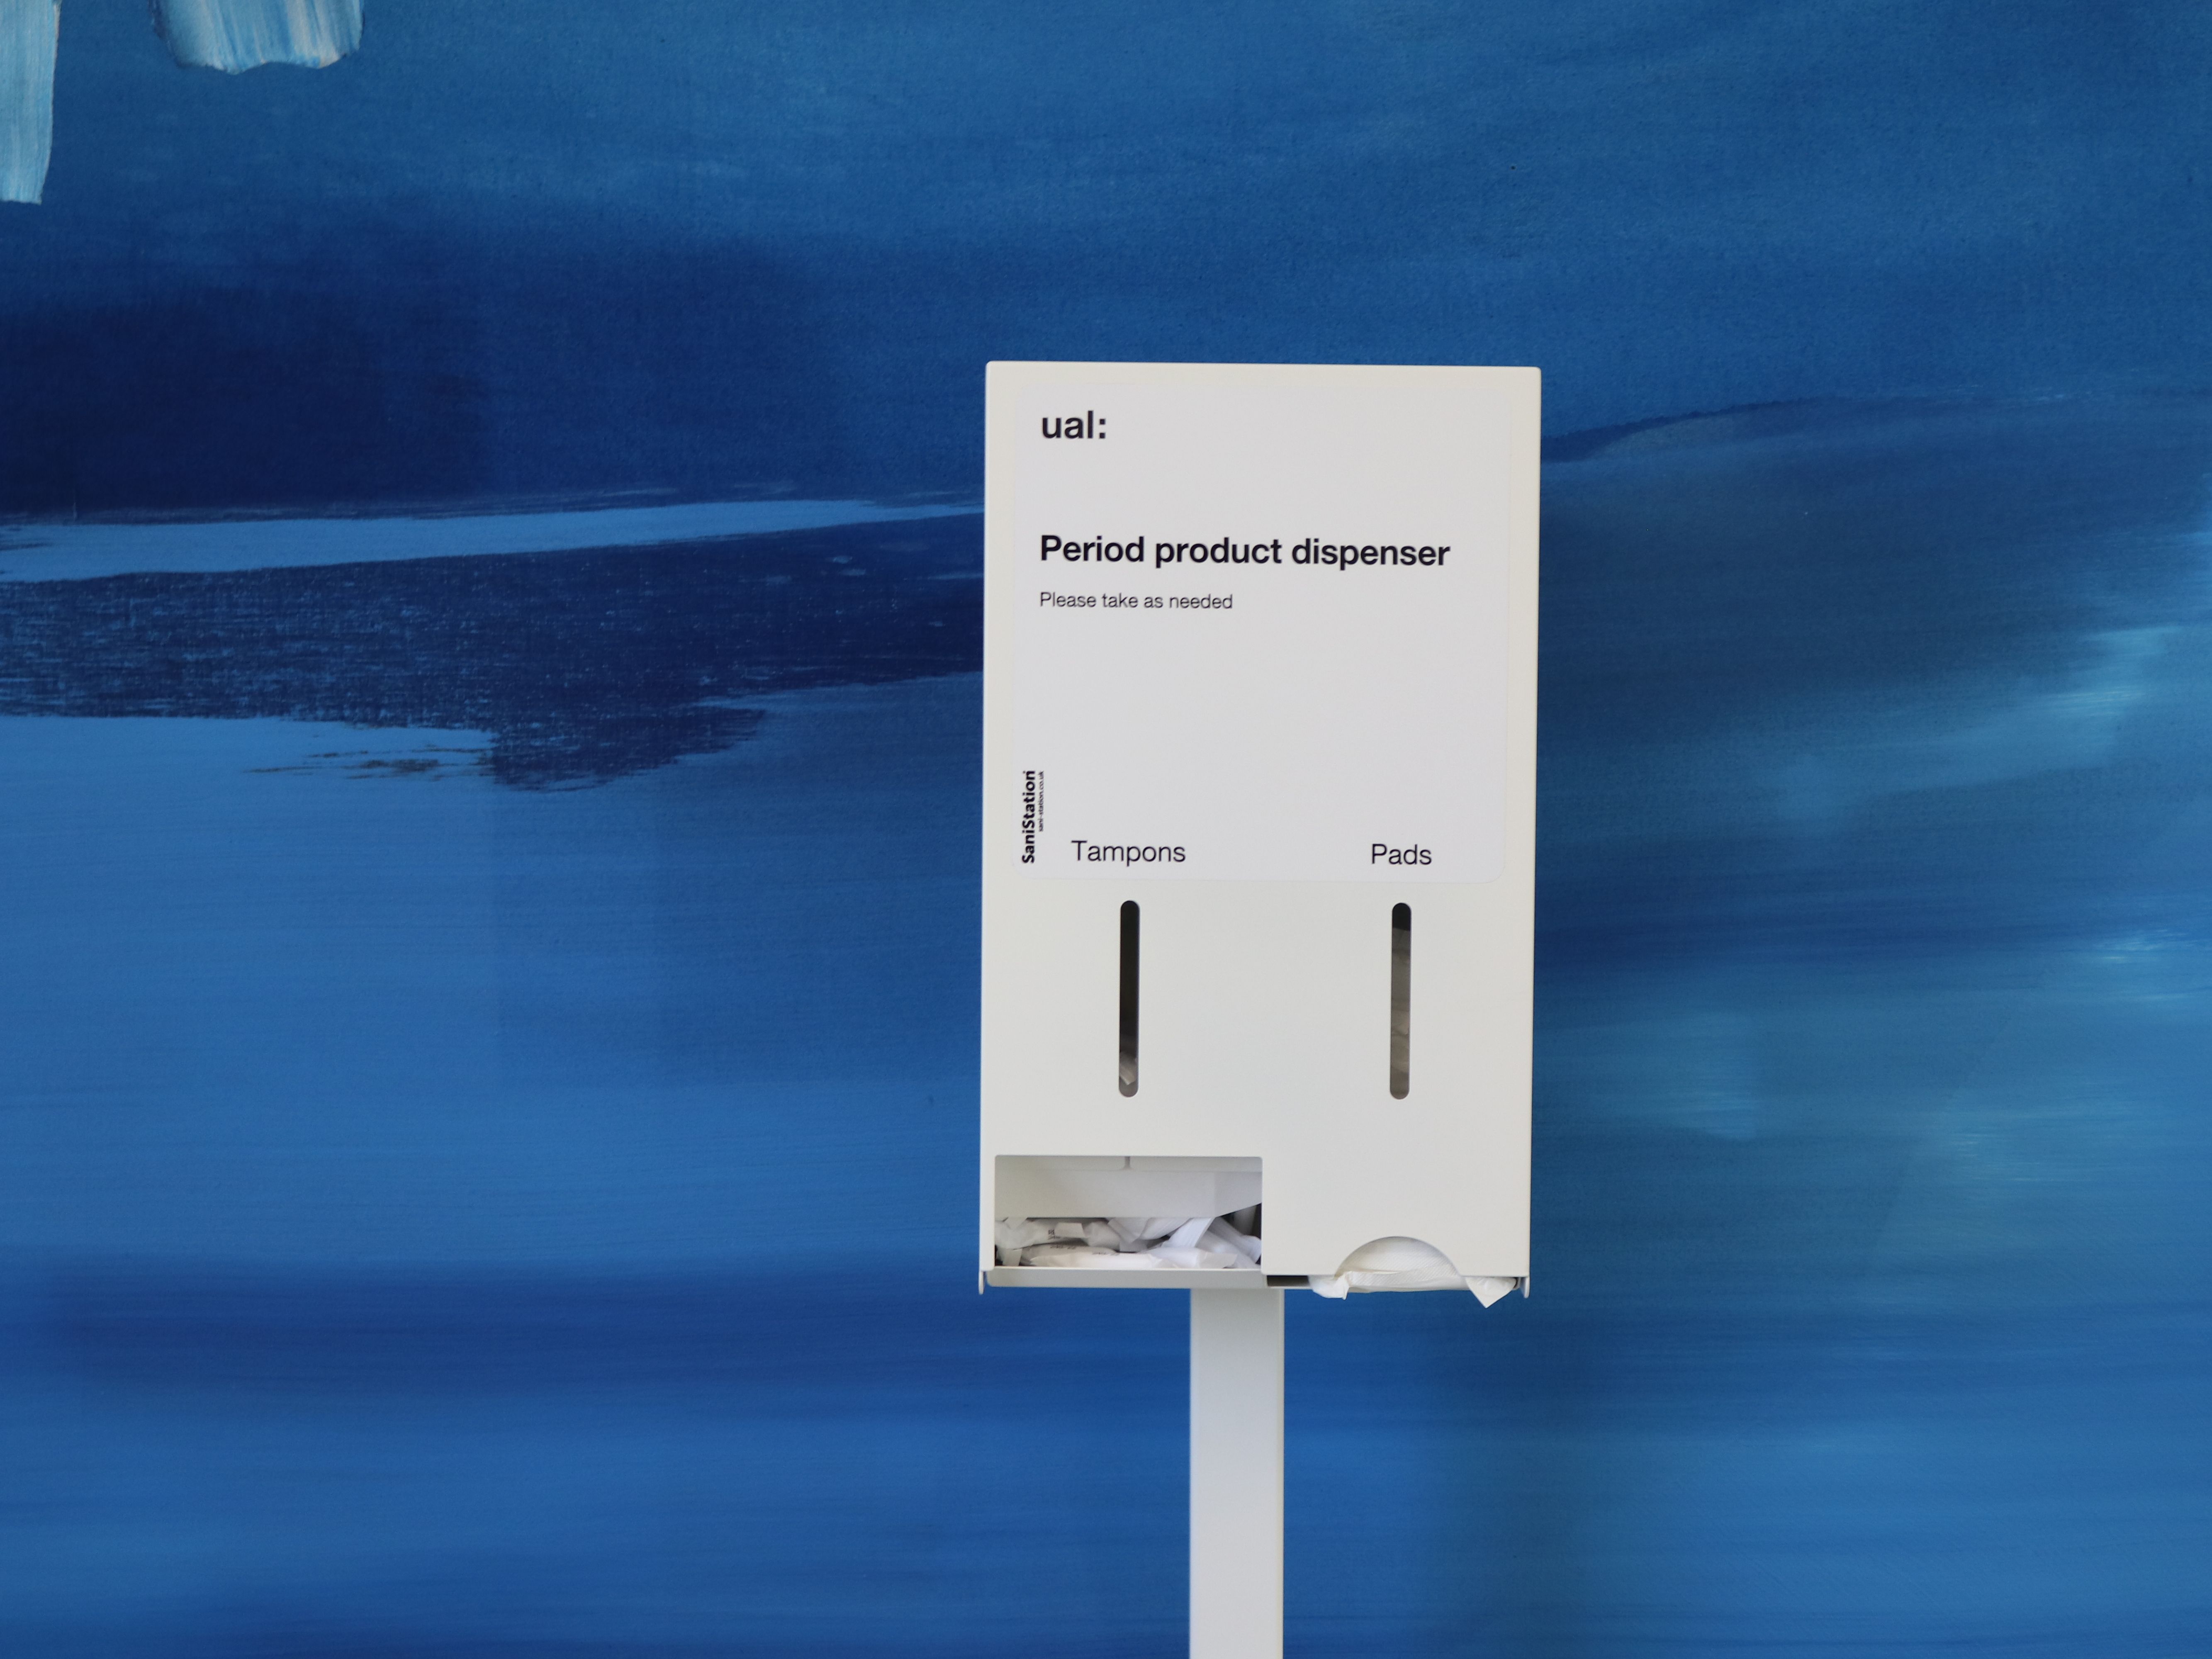 A white dispenser is labelled 'Period product dispenser'. You can see 2 slots, one for tampons and one for sanitary pads.